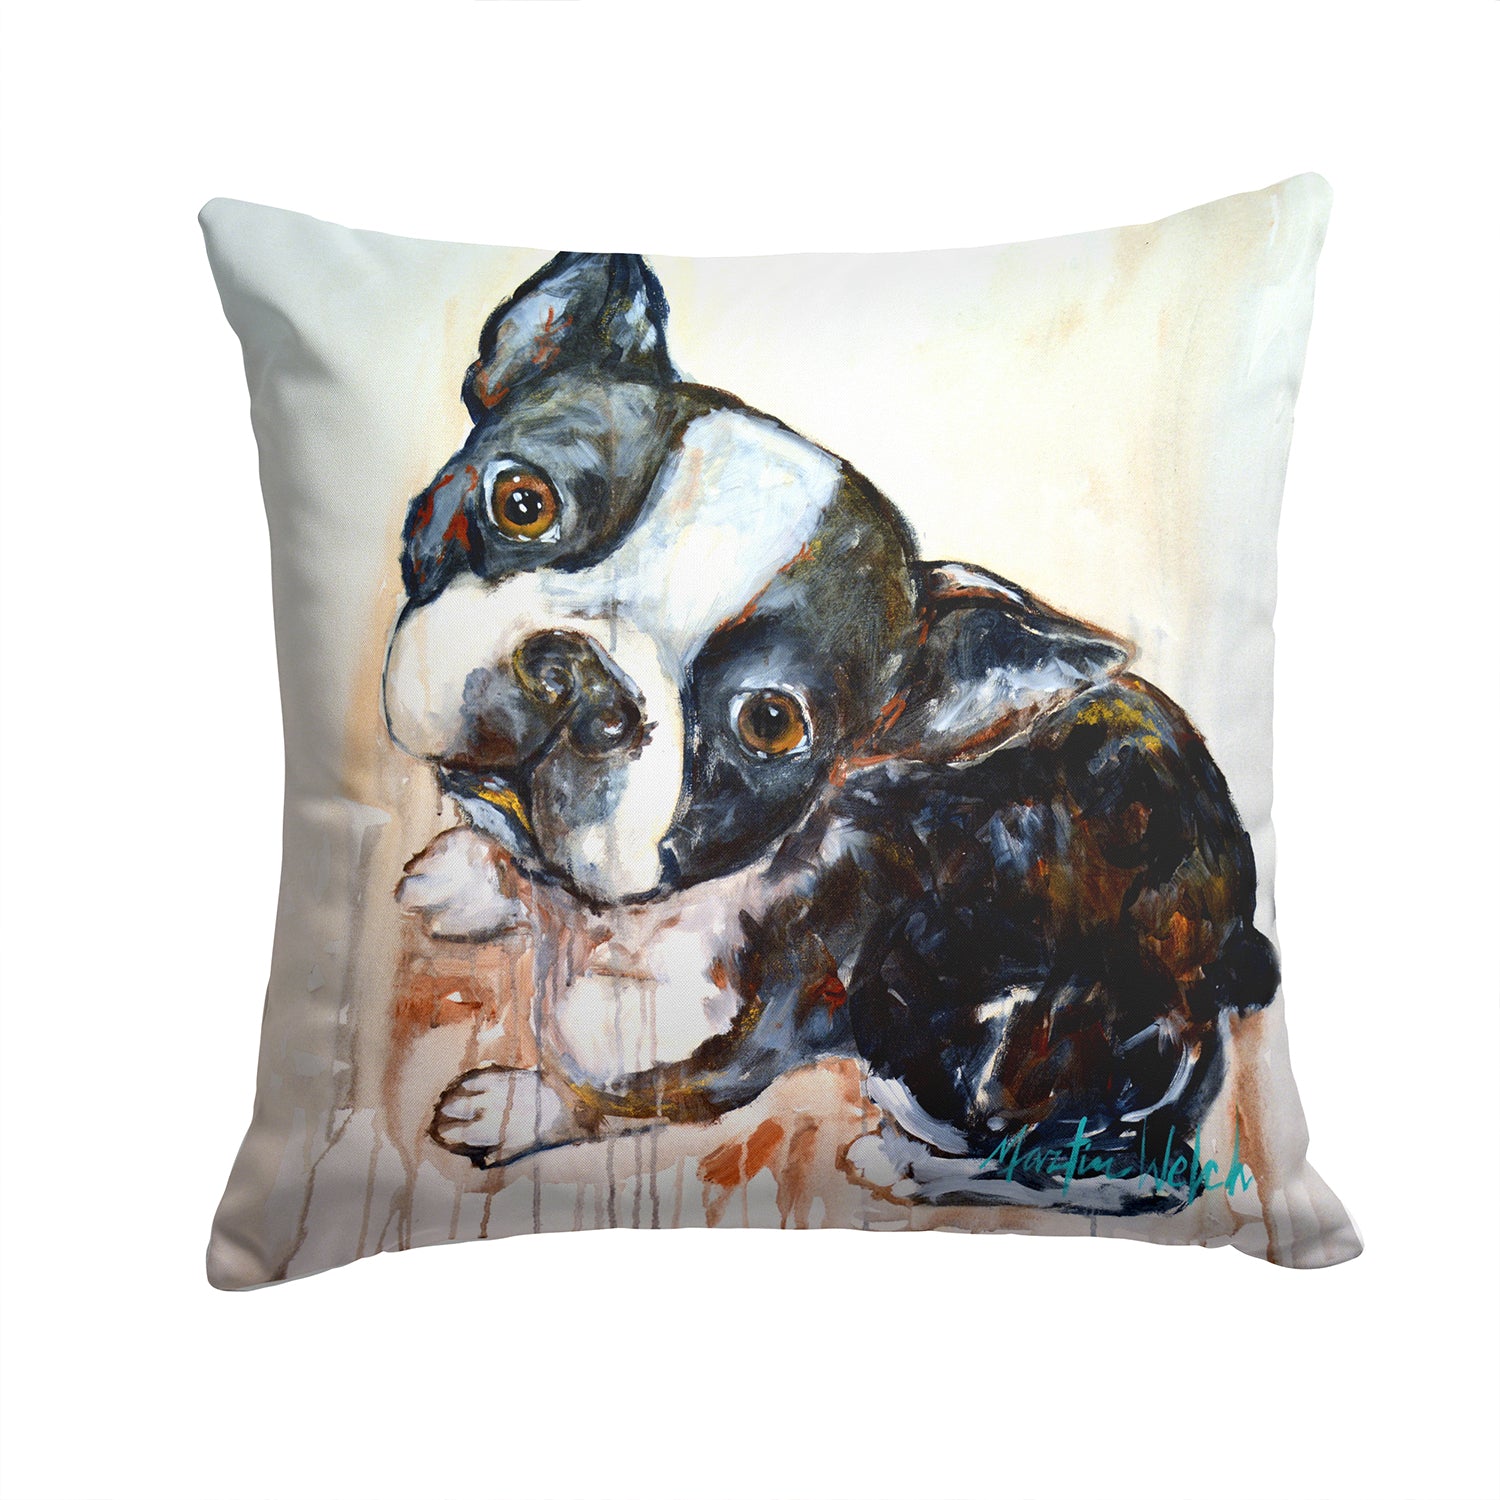 Buy this Boston Terrier Jake The Look Fabric Decorative Pillow